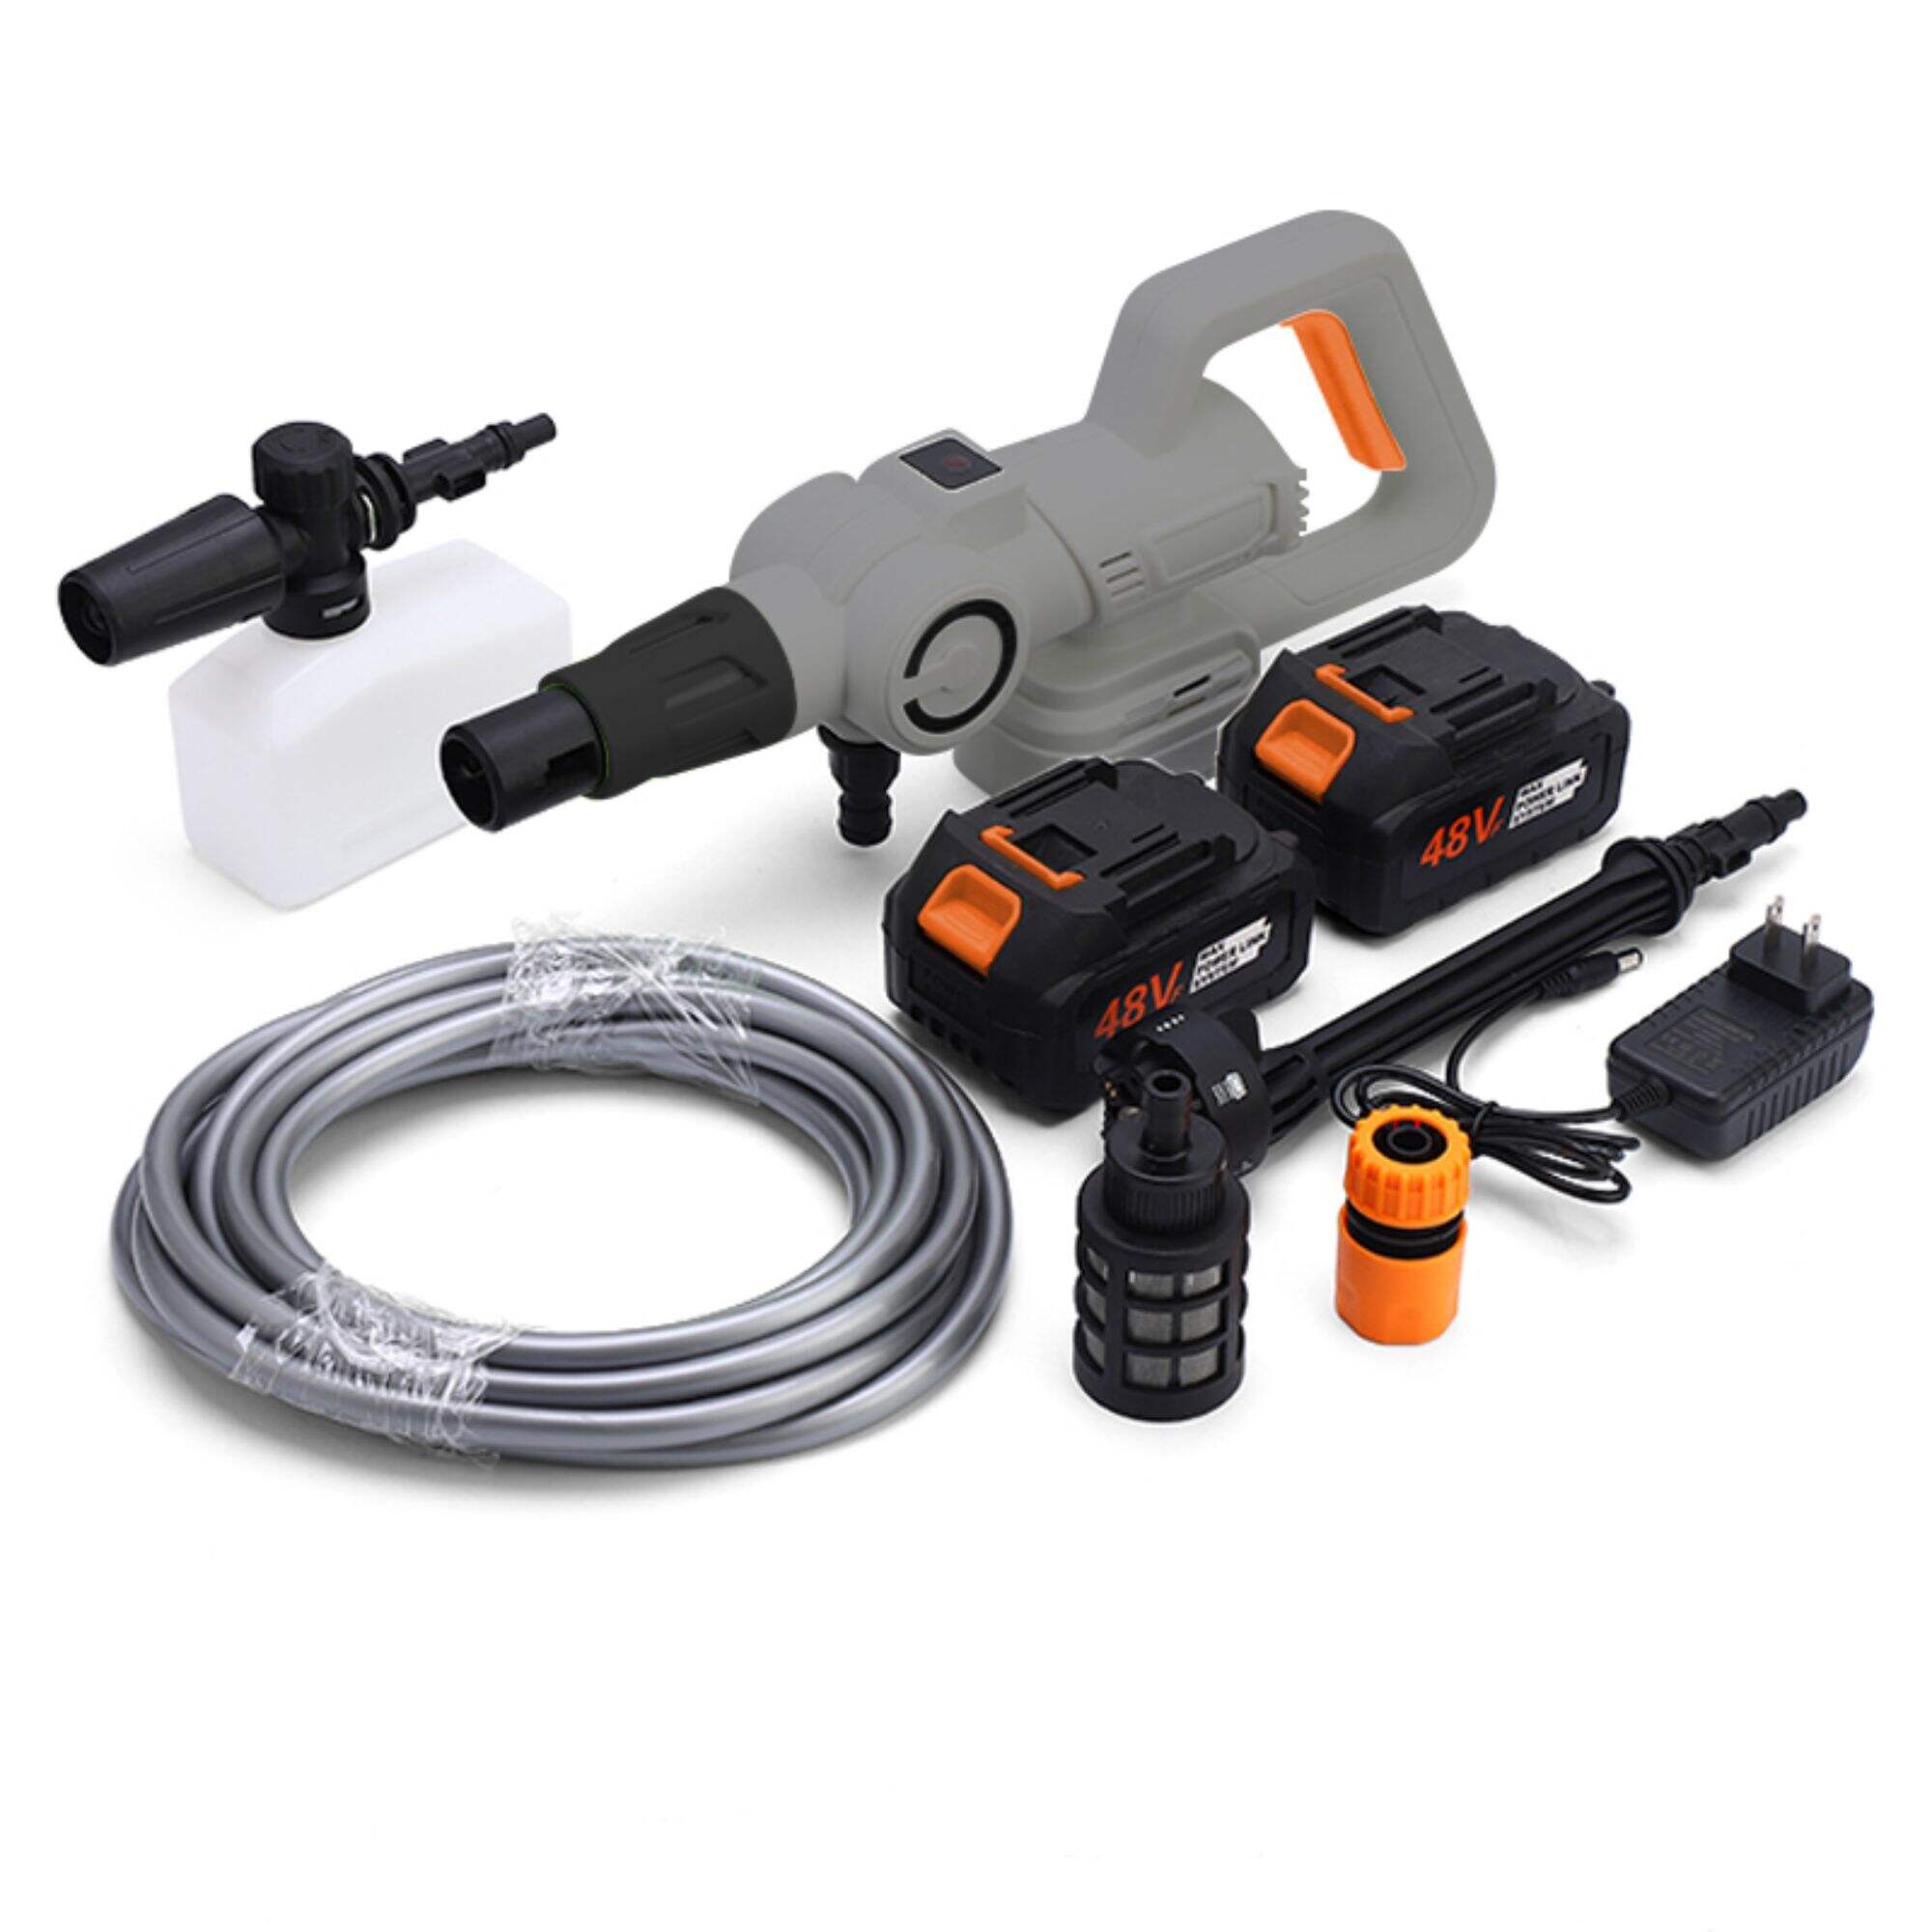 Portable cordless pressure washer for car wash with double Batteries